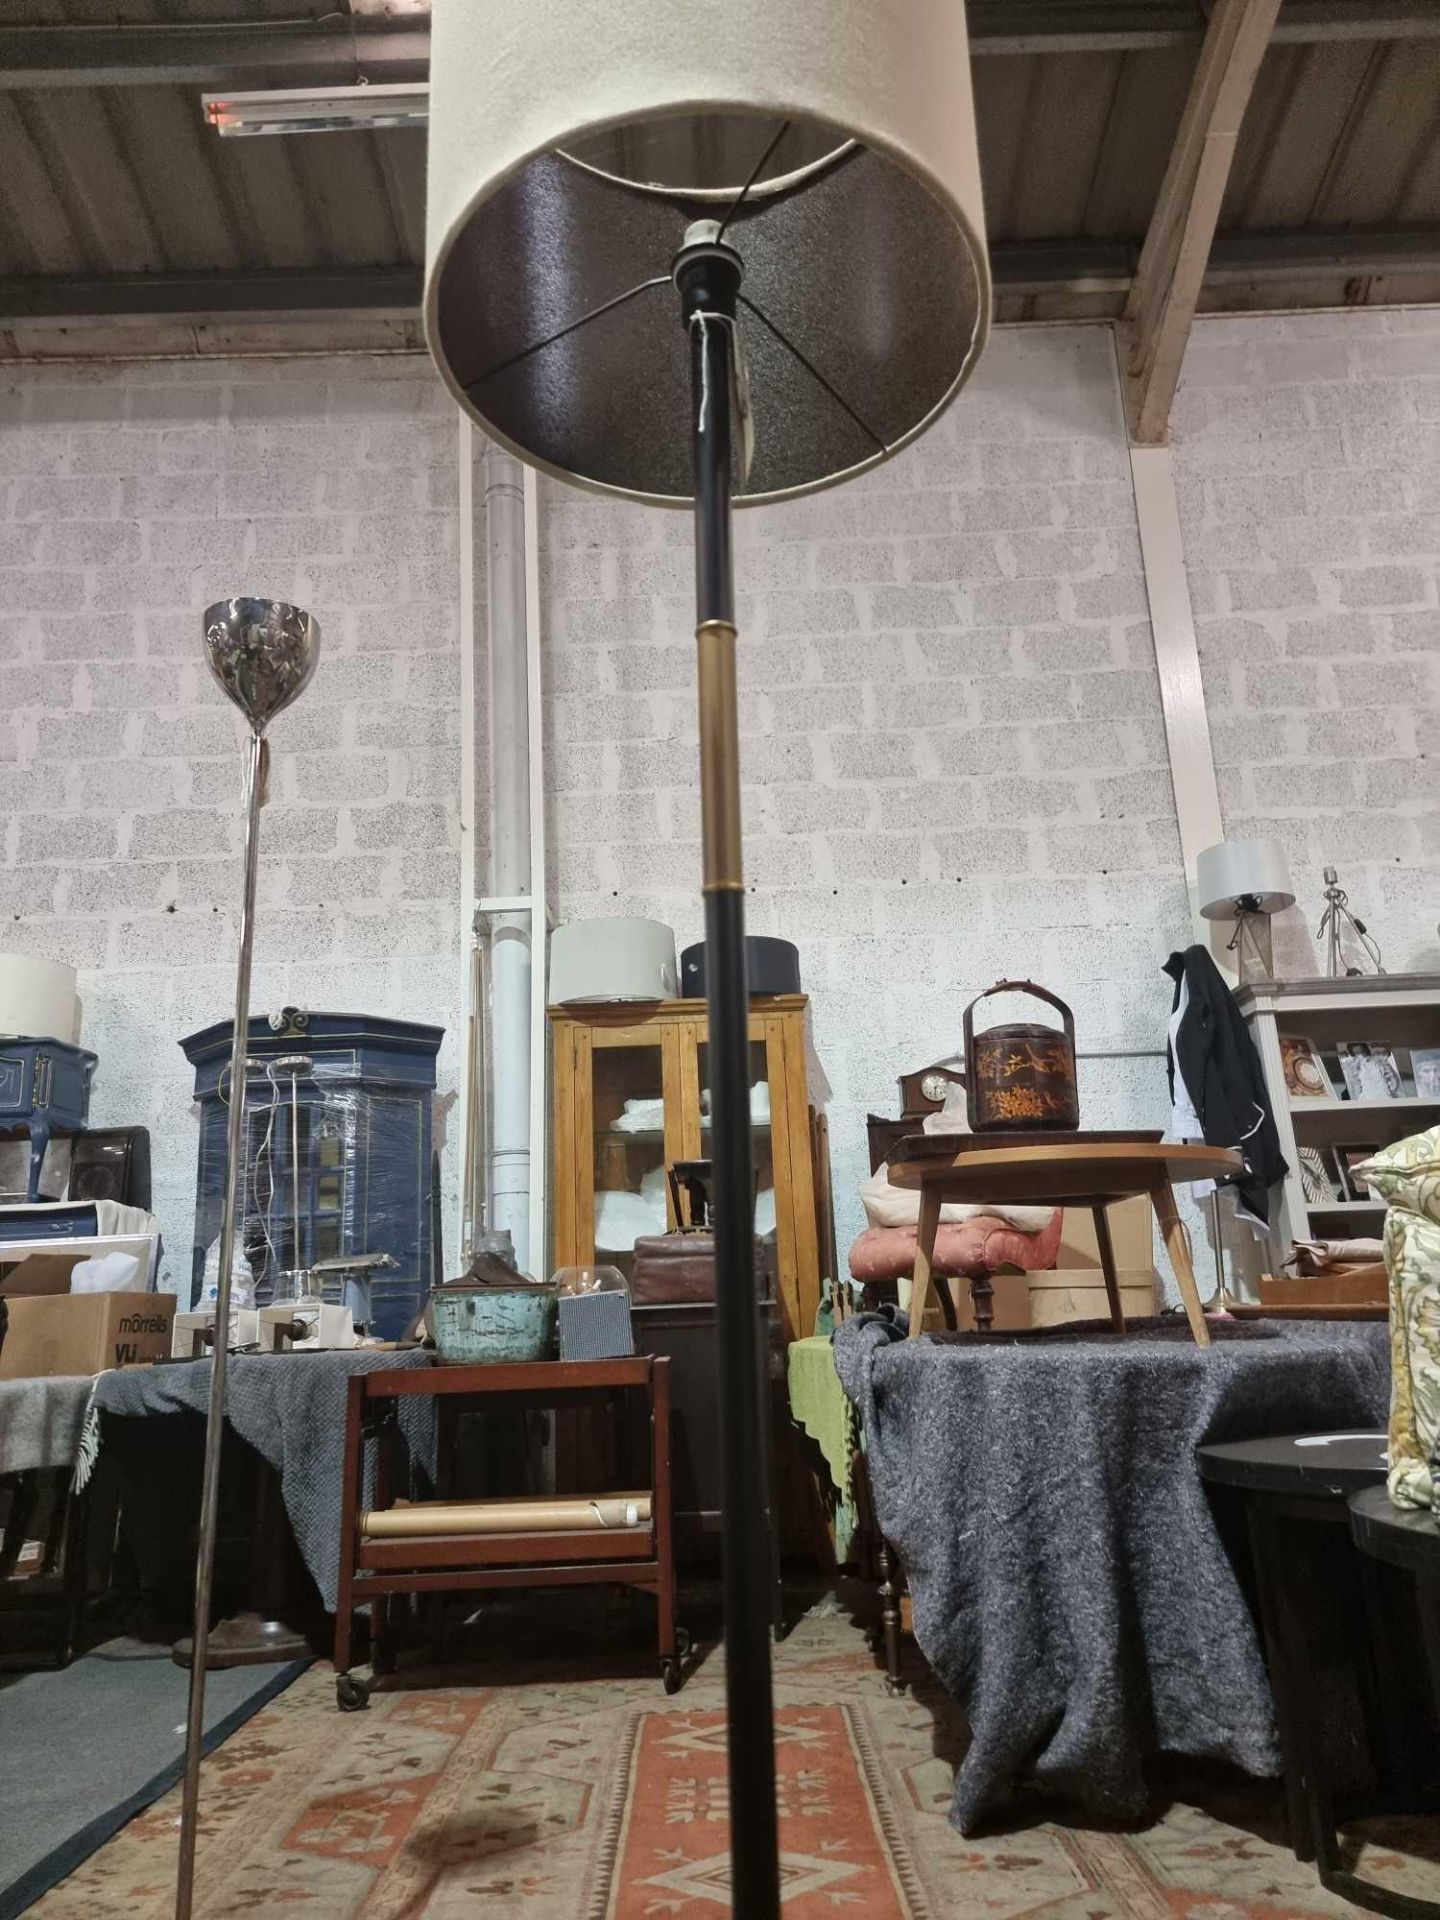 R V Astley Alix Floor Lamp - Antique Brass And Black Marble, Black And Antique Brass Floor Lamp W - Image 5 of 5